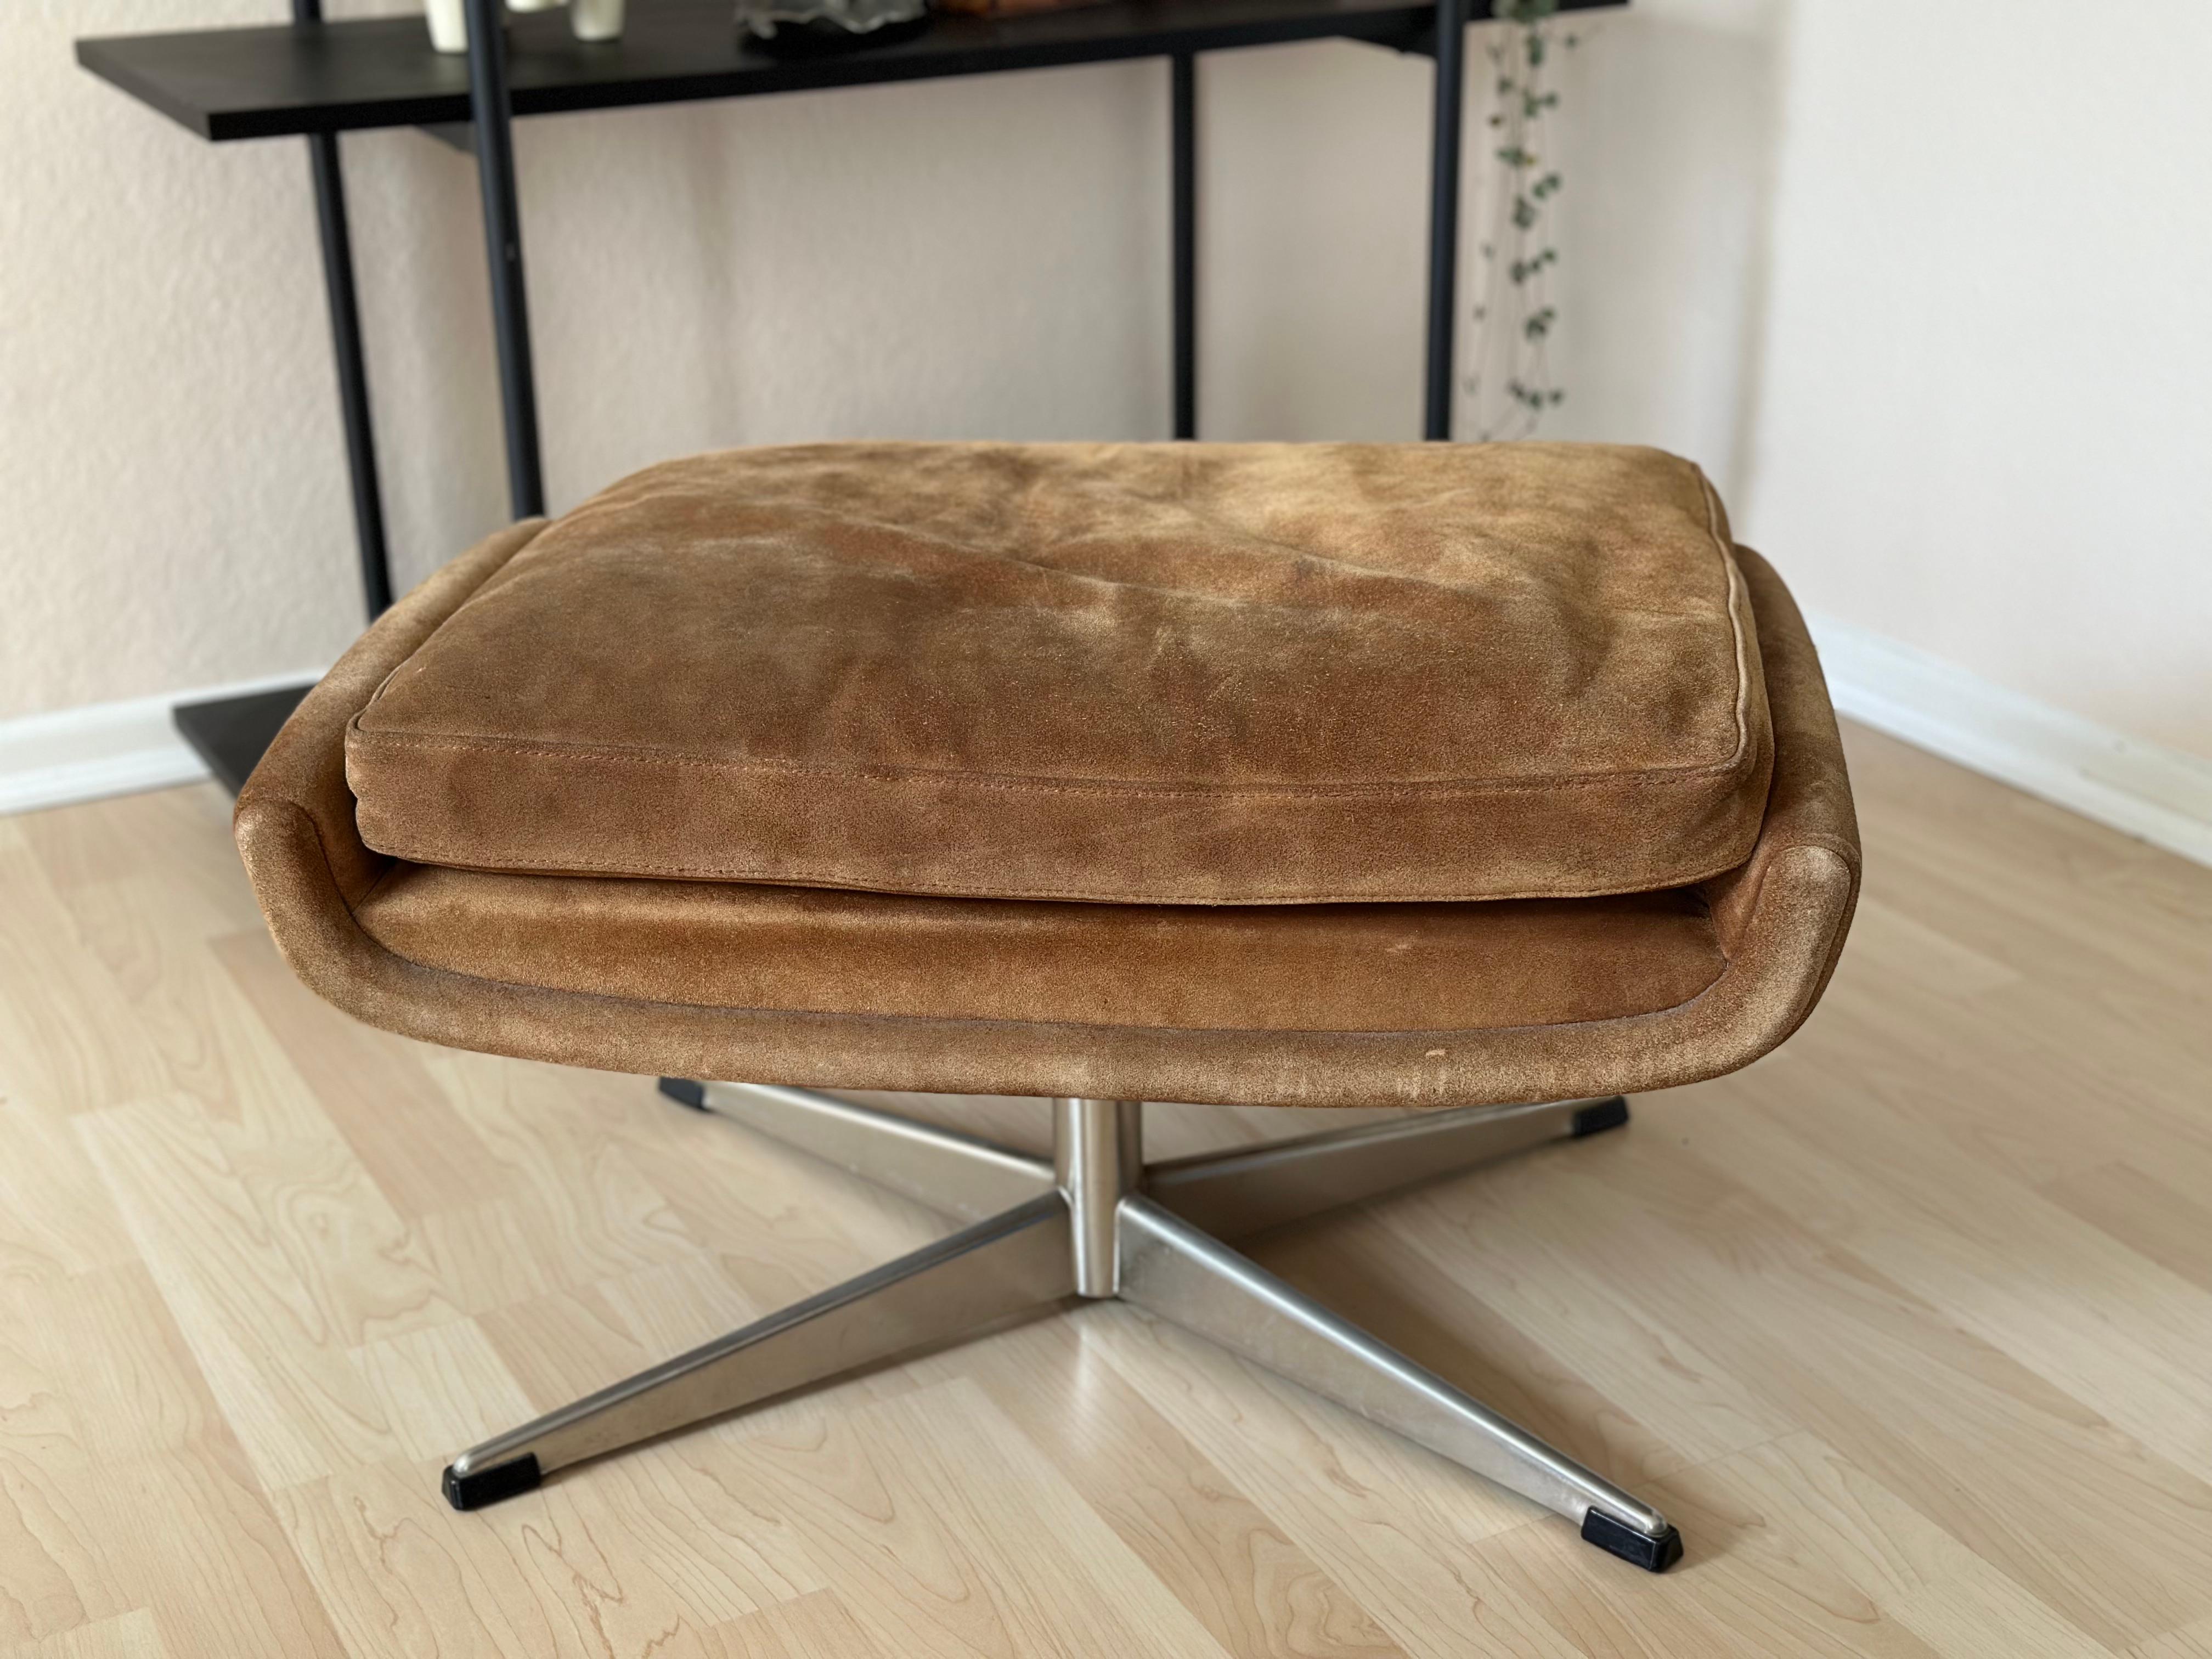 Introducing our exquisite Ottoman, crafted from genuine wild leather and supported by a sturdy metal frame. This practical piece of furniture is the perfect companion for your armchair or sofa, offering both comfort and functionality in one elegant